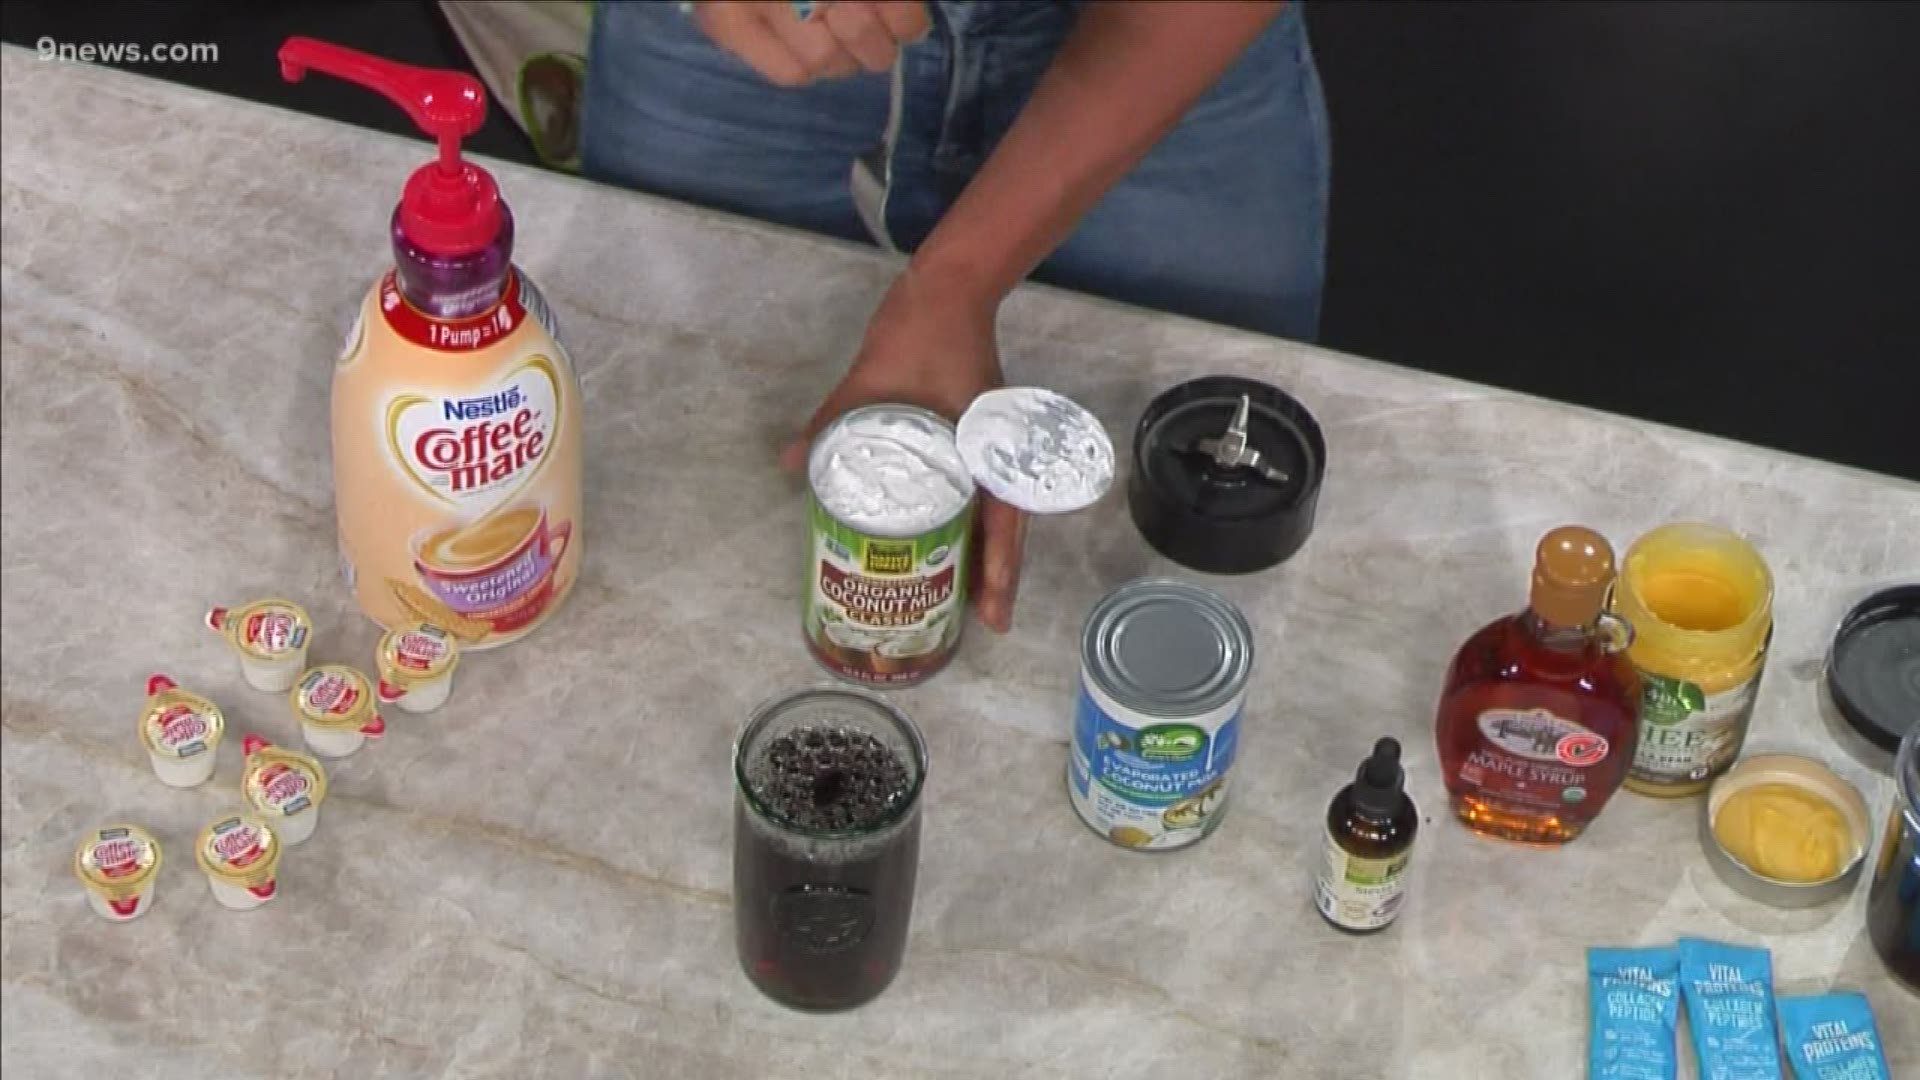 9NEWS fitness expert Emily Schromm recommends the natural ways to add sweetener or creamer to your coffee.